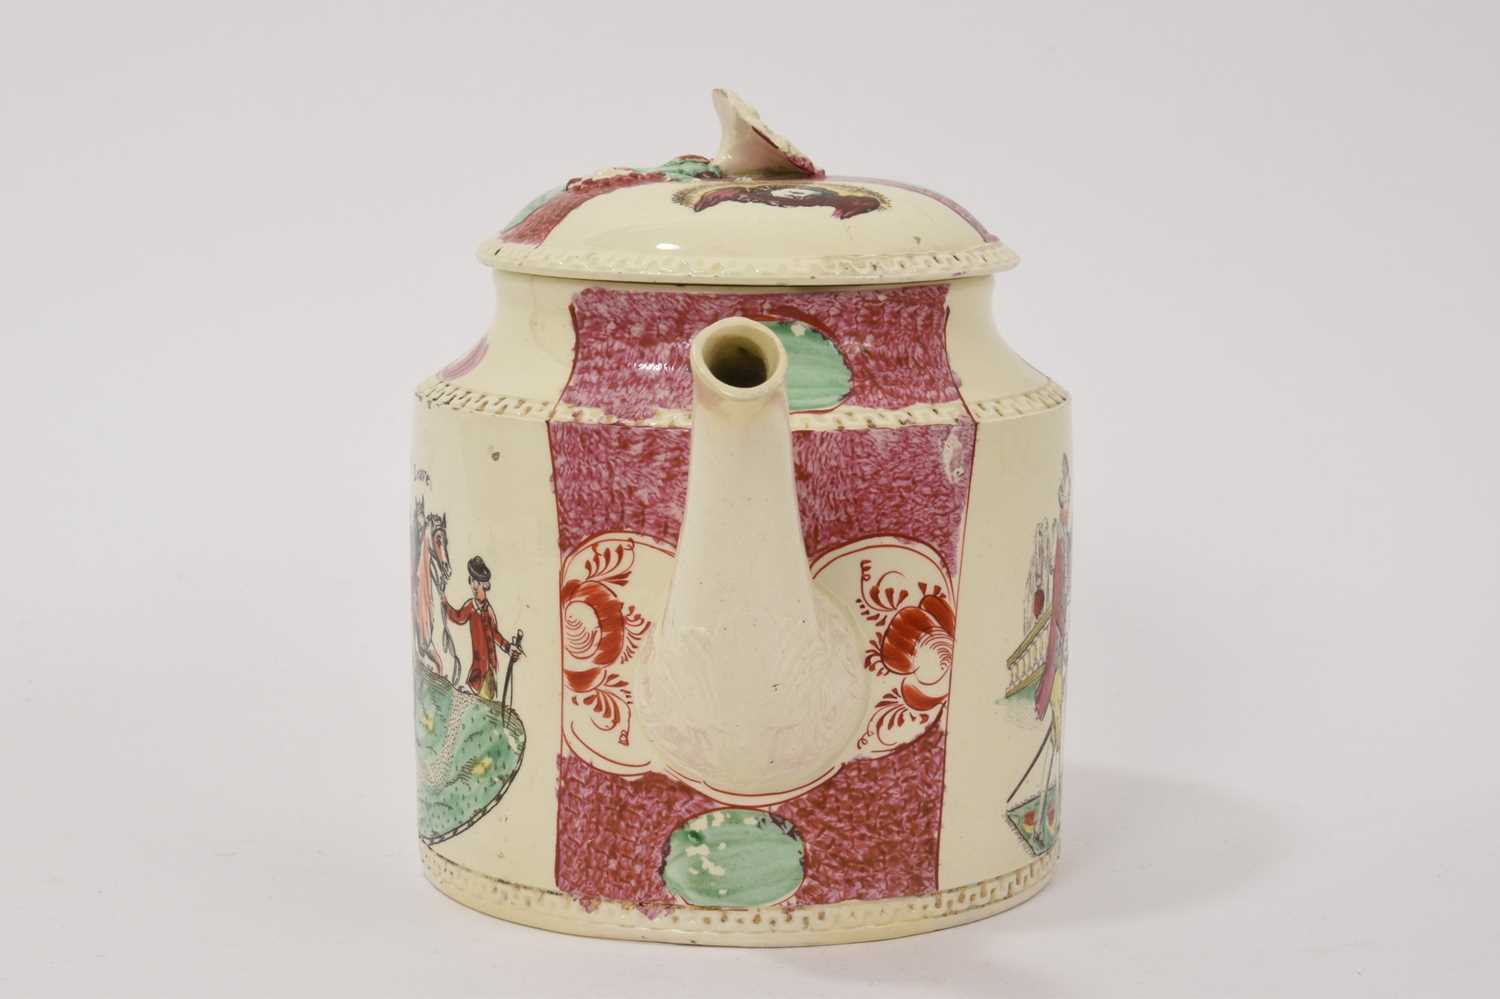 18th century creamware teapot by William Greatbatch - The prodigal son taking leave - Image 2 of 8